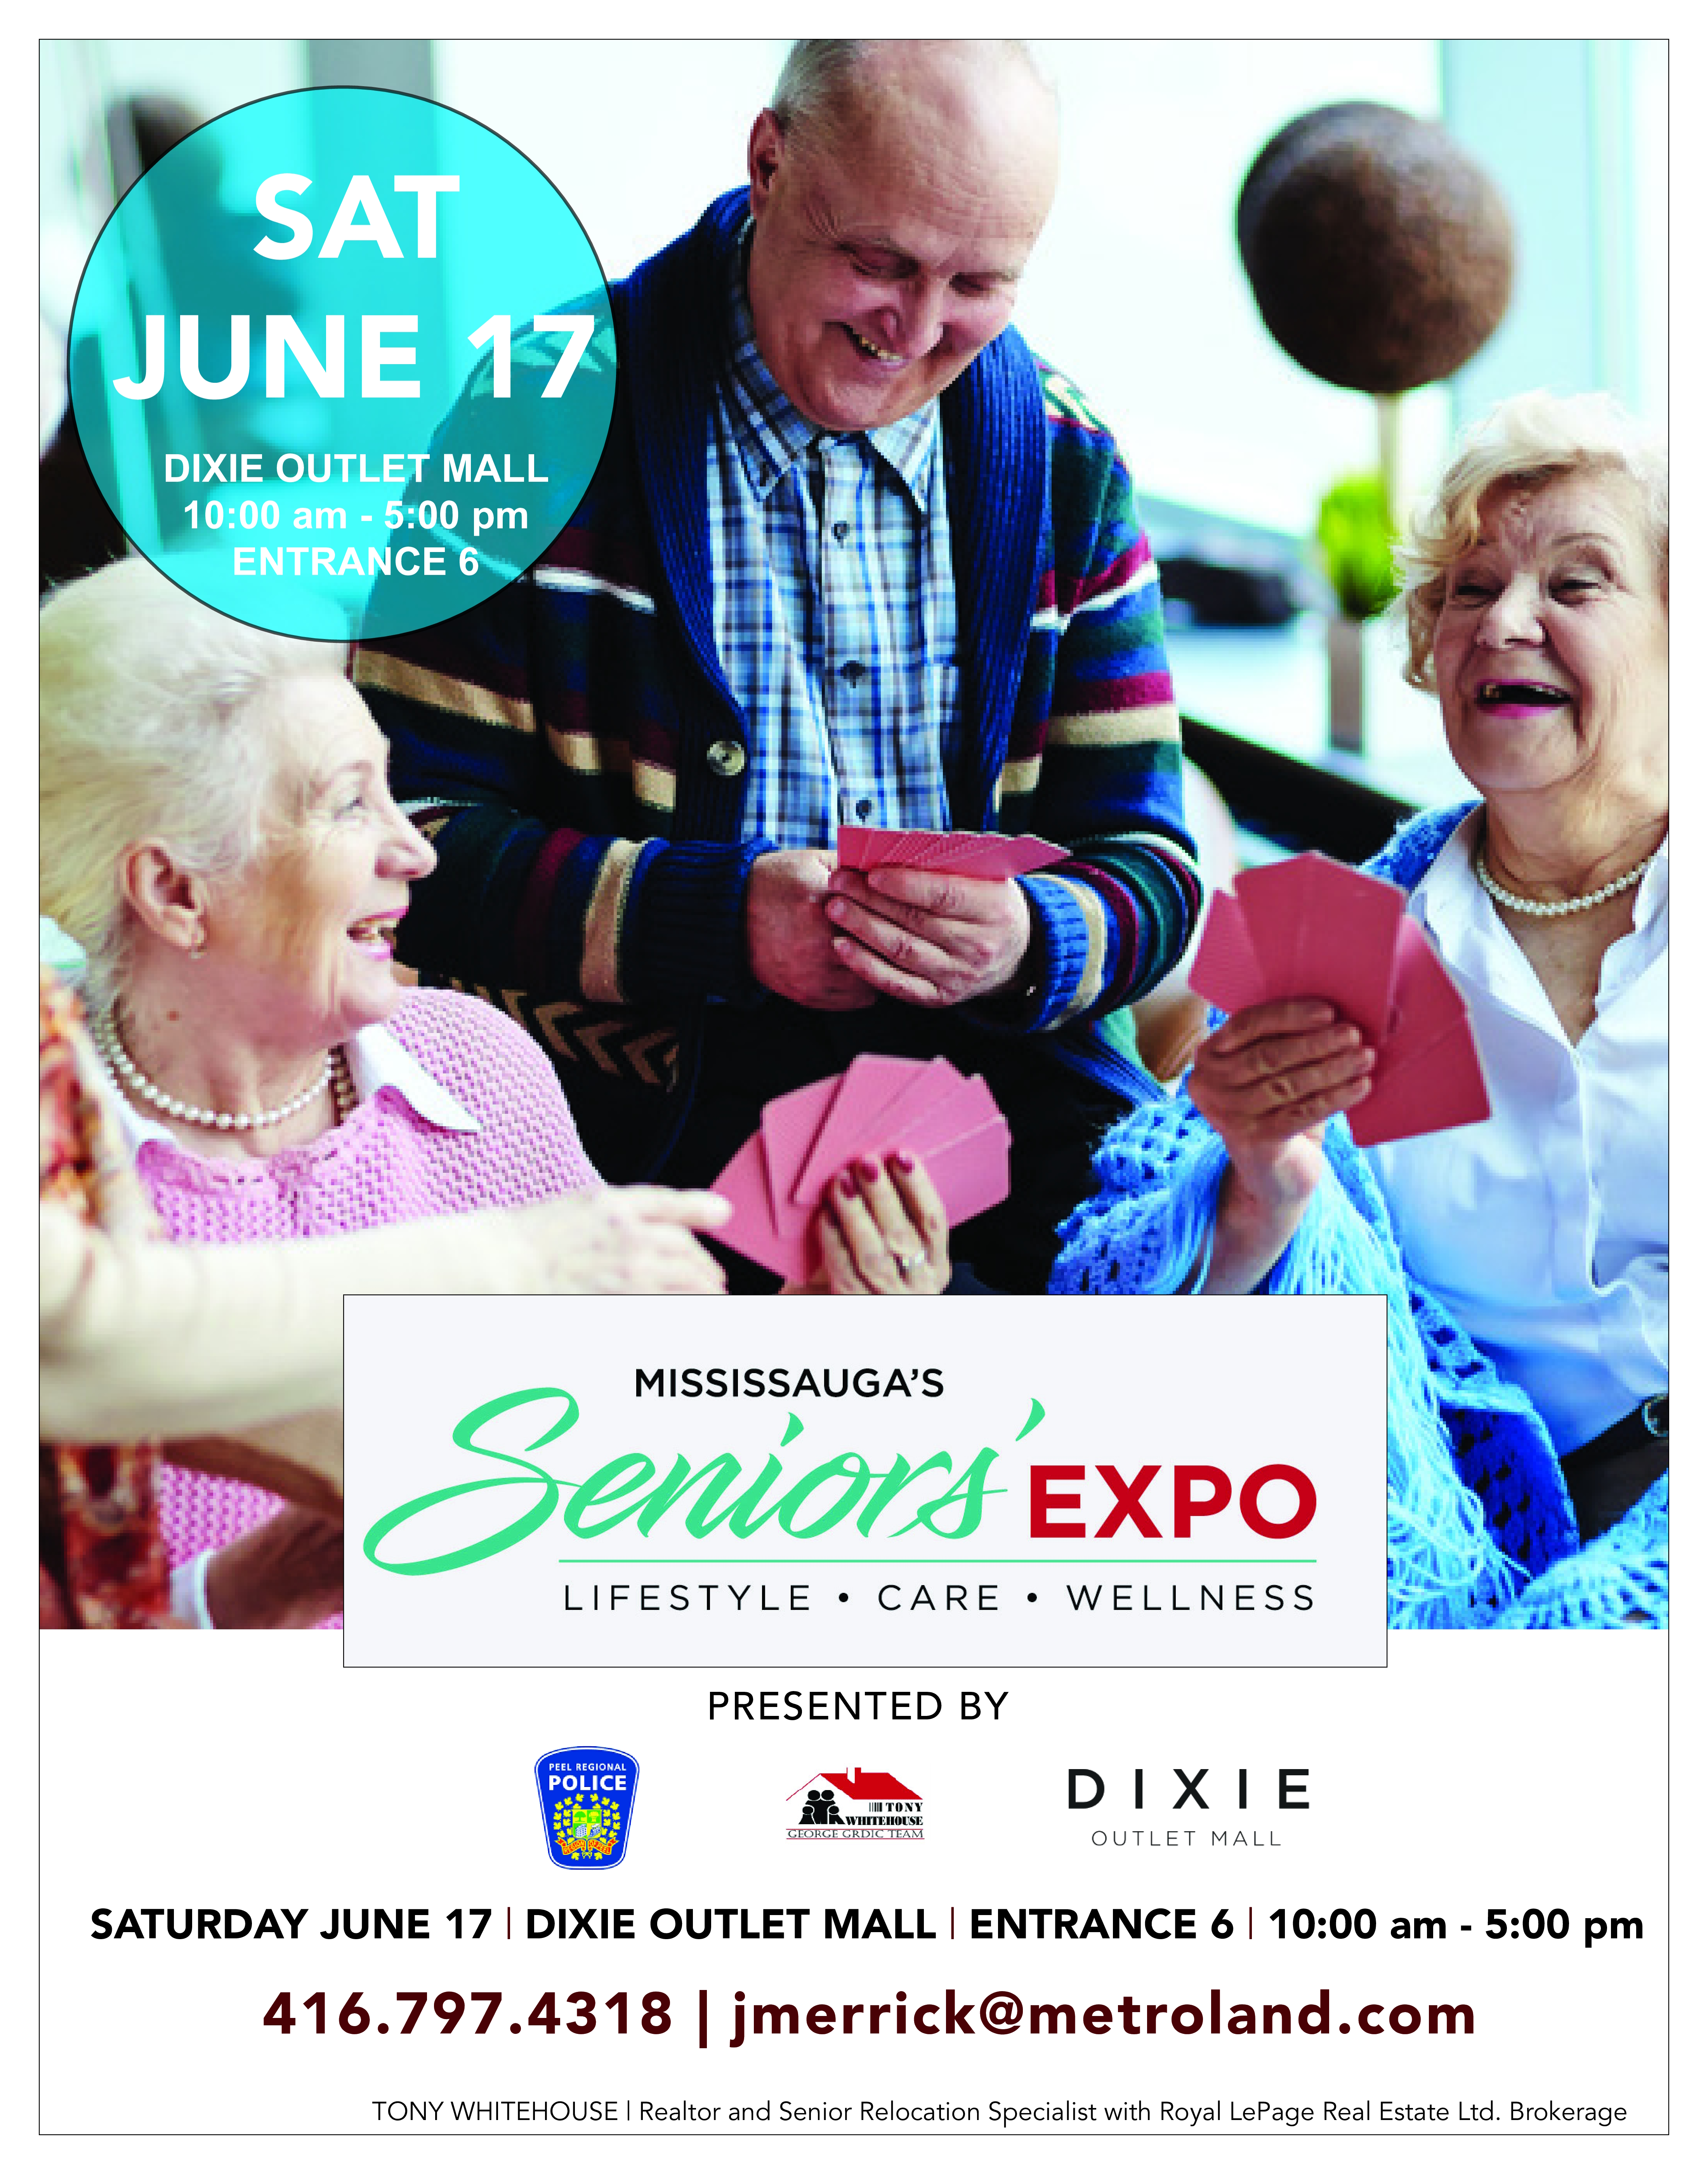 Image from https://dixieoutletmall.com/events/dixie-outlet-mall-mississauga-s-senior-s-expo